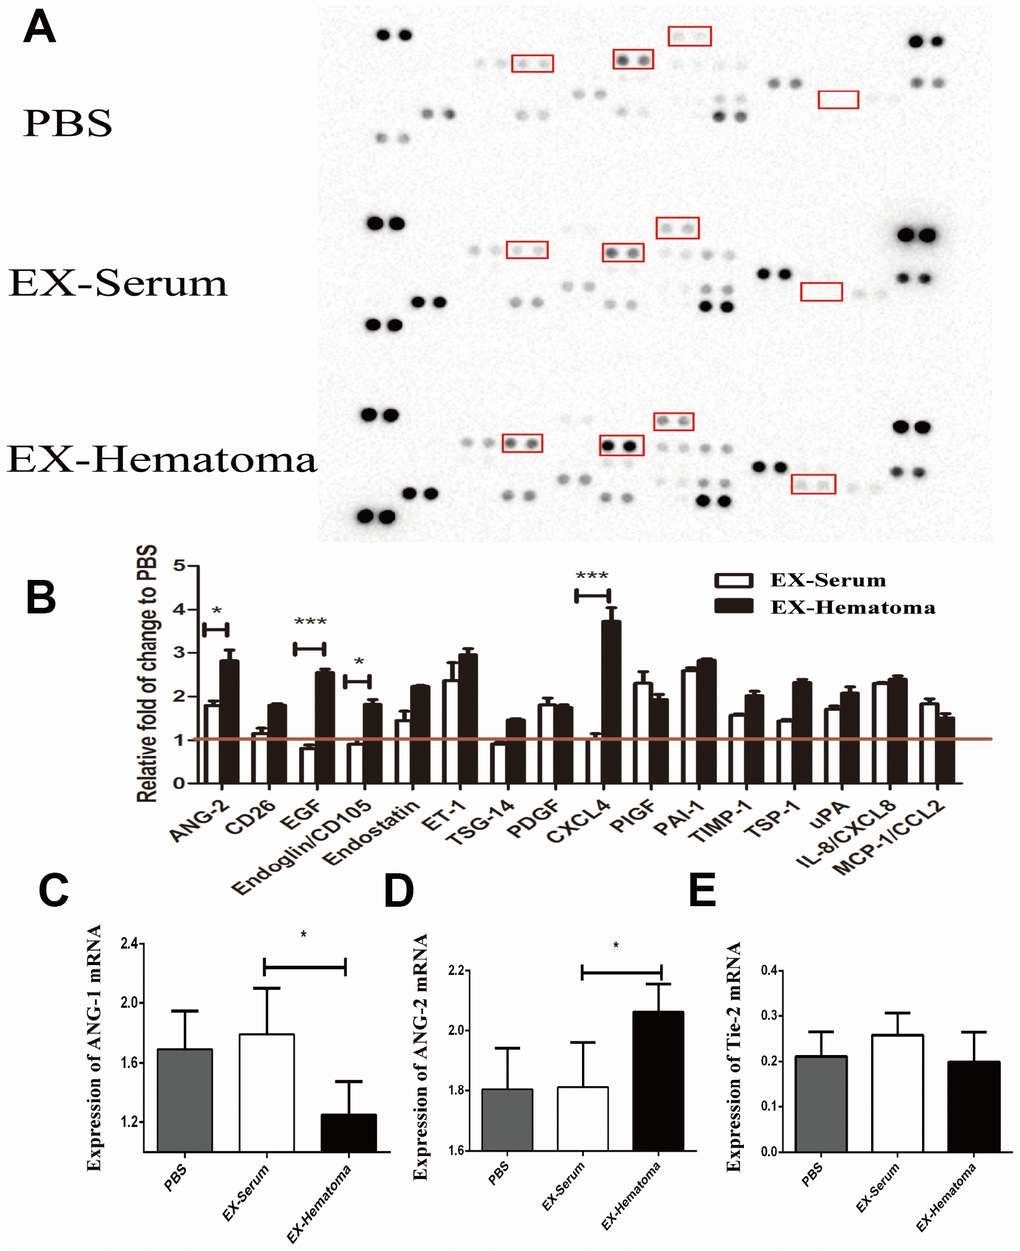 The effects of hematoma-derived exosomes on angiogenic cytokine expression. (A) Representative images of the cytokine array. (B) Quantification of cytokine expression. ANG-2, EGF, Endoglin, and CXCL4 expression were higher in the EX-Hematoma compared to the EX-Serum group. (C–E) RT-PCR analysis of ANG-1, ANG-2, and Tie-2 mRNA expression following co-culture with exosomes. ANG-2 mRNA expression was higher, while ANG-1 expression was lower in the EX-Hematoma compared to the EX-Serum group. * p 